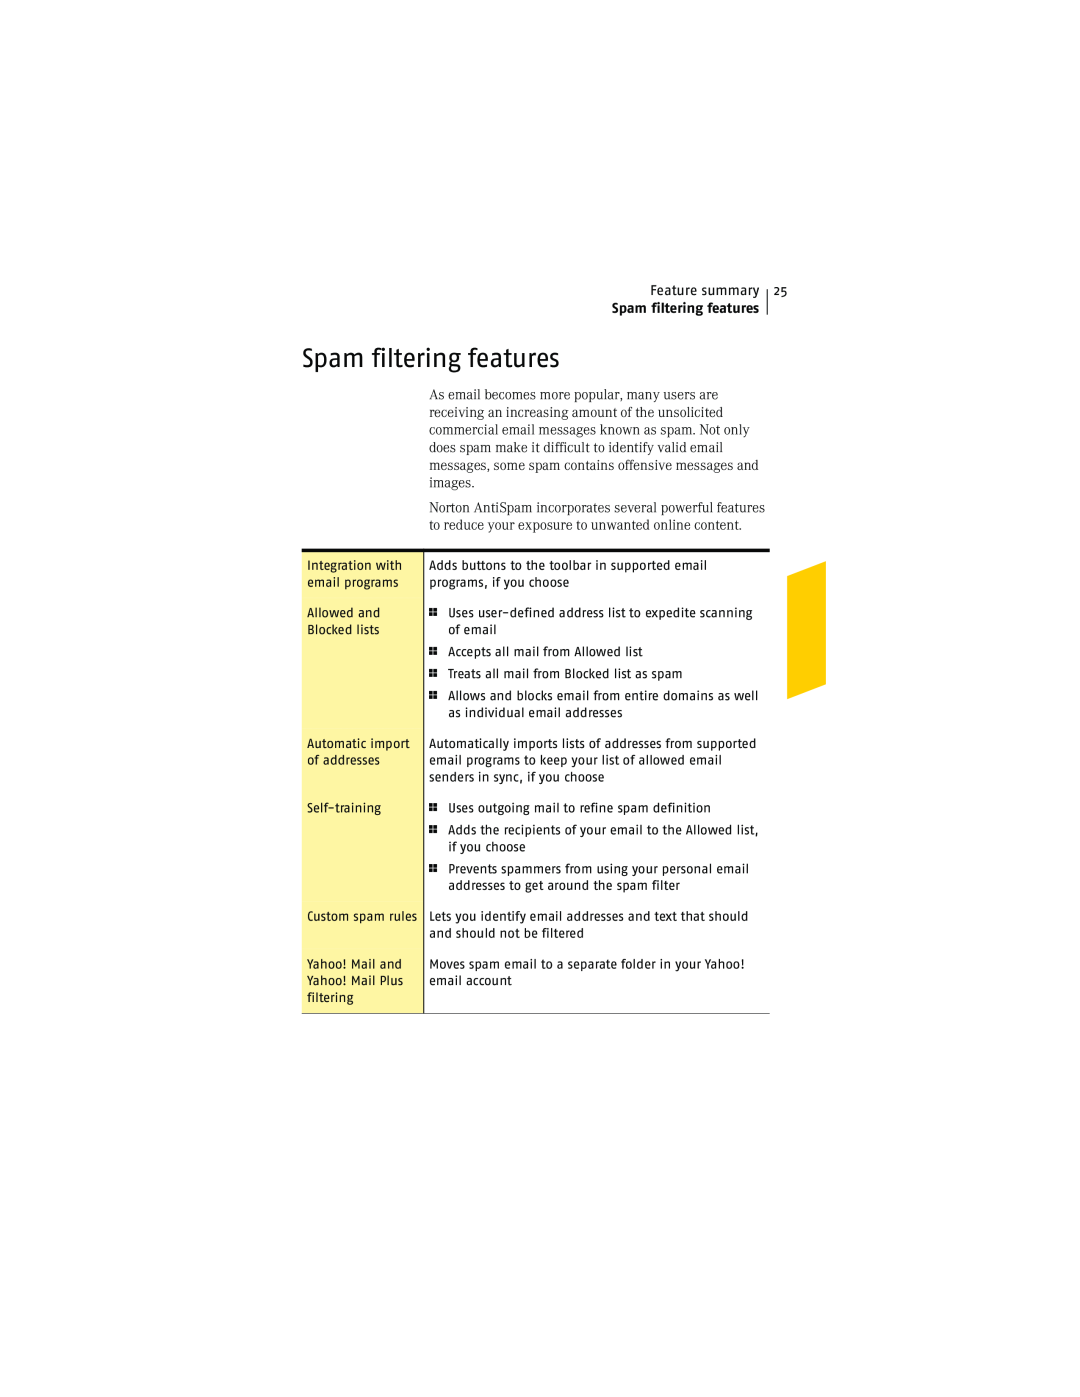 Symantec NIS2005 manual Spam filtering features, Feature summary 